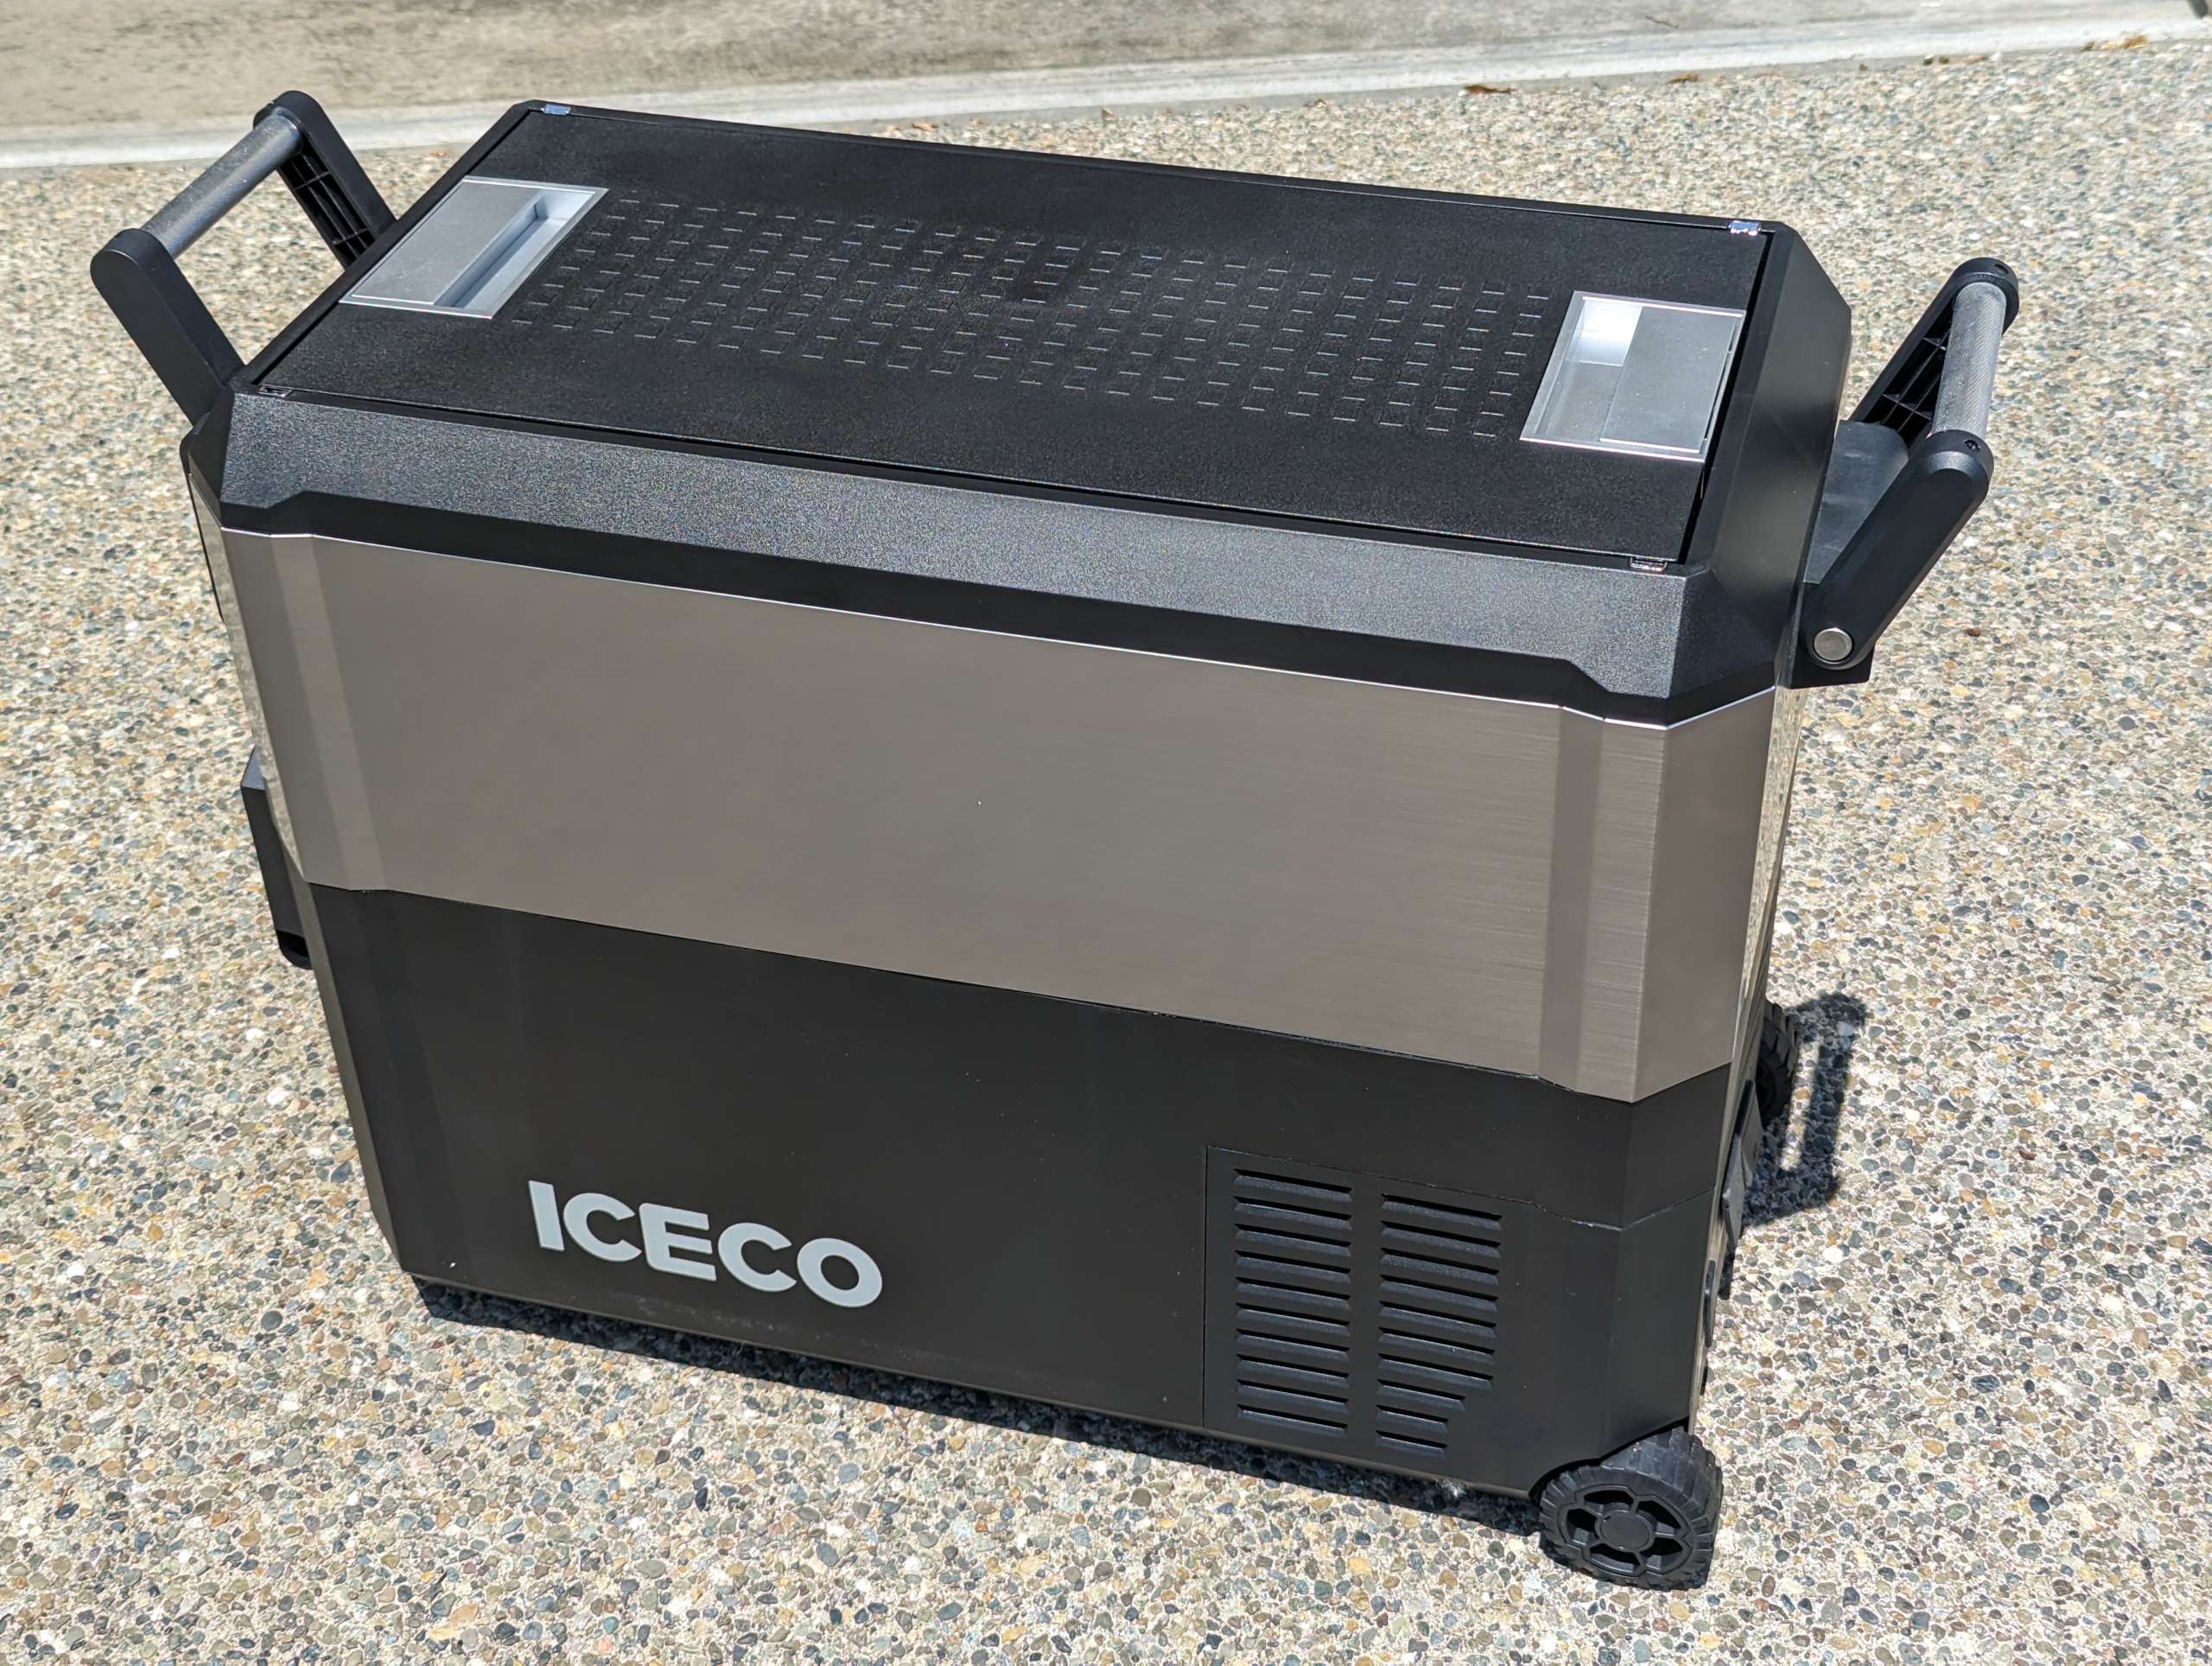 Iceco JP50 Pro 50L Wheeled Portable Freezer review - my new road